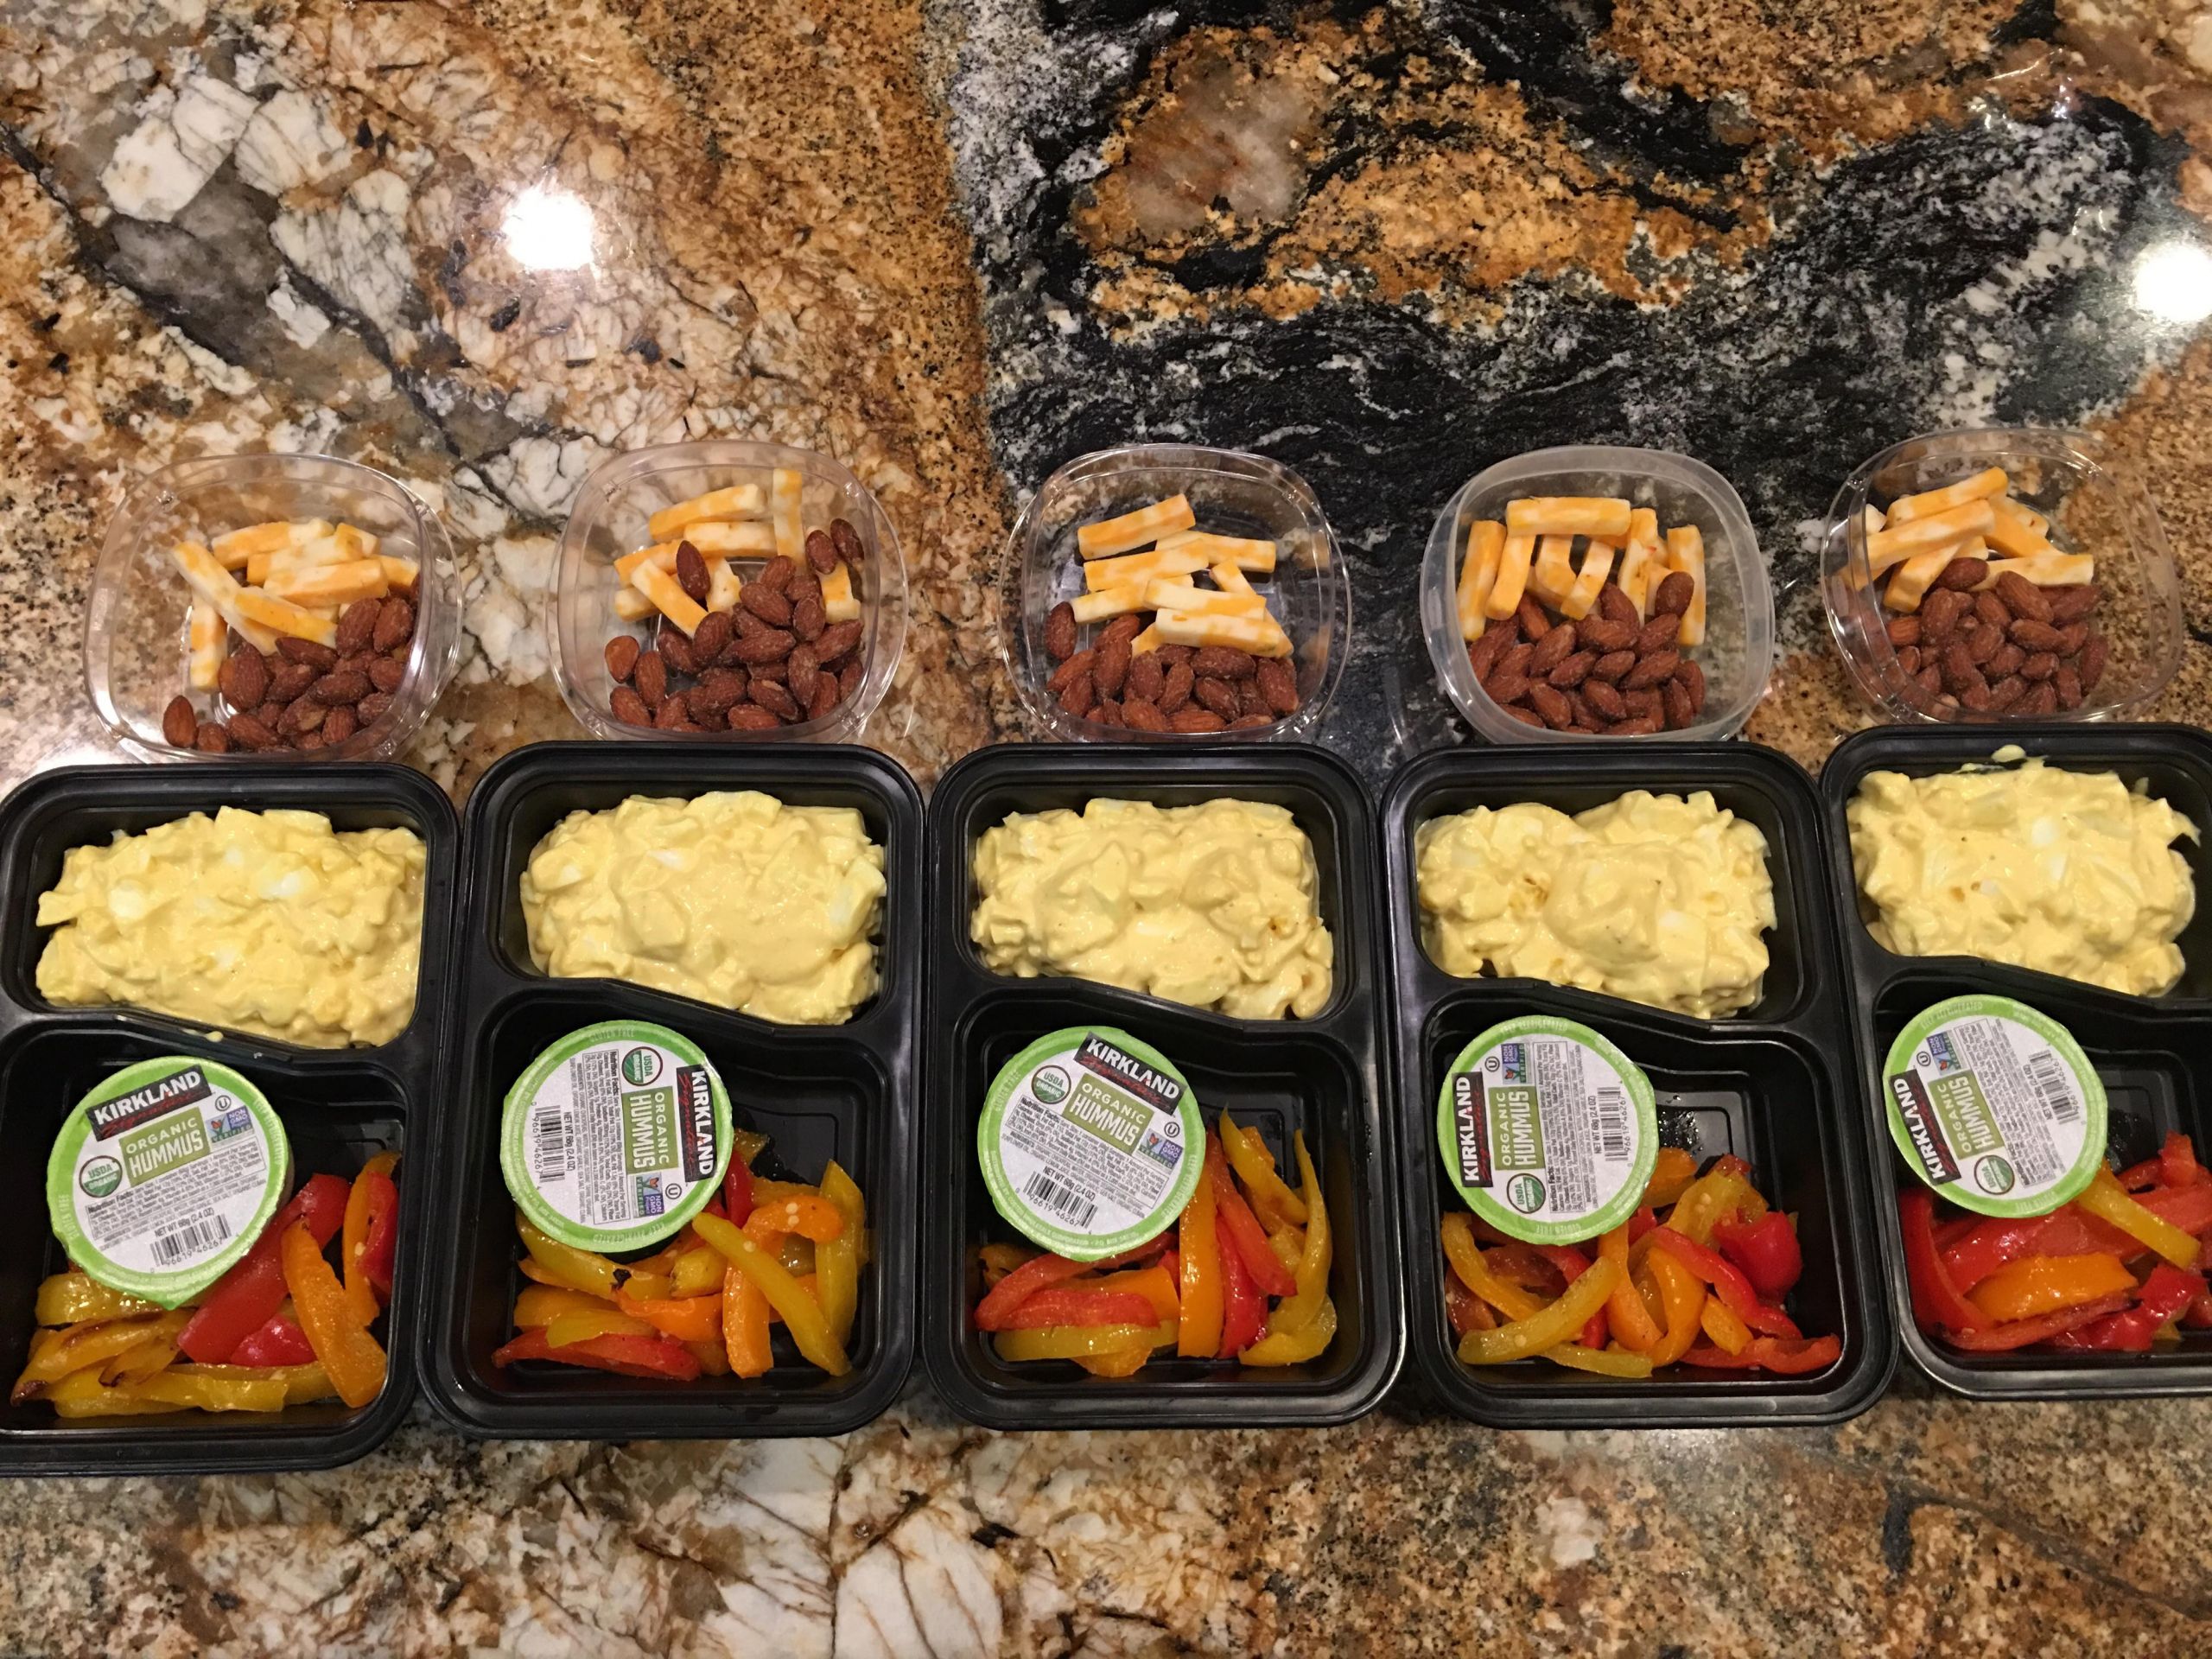 Vegetarian Keto Meal Prep
 Ve arian Keto Lunch and Snack about 13 net carbs total